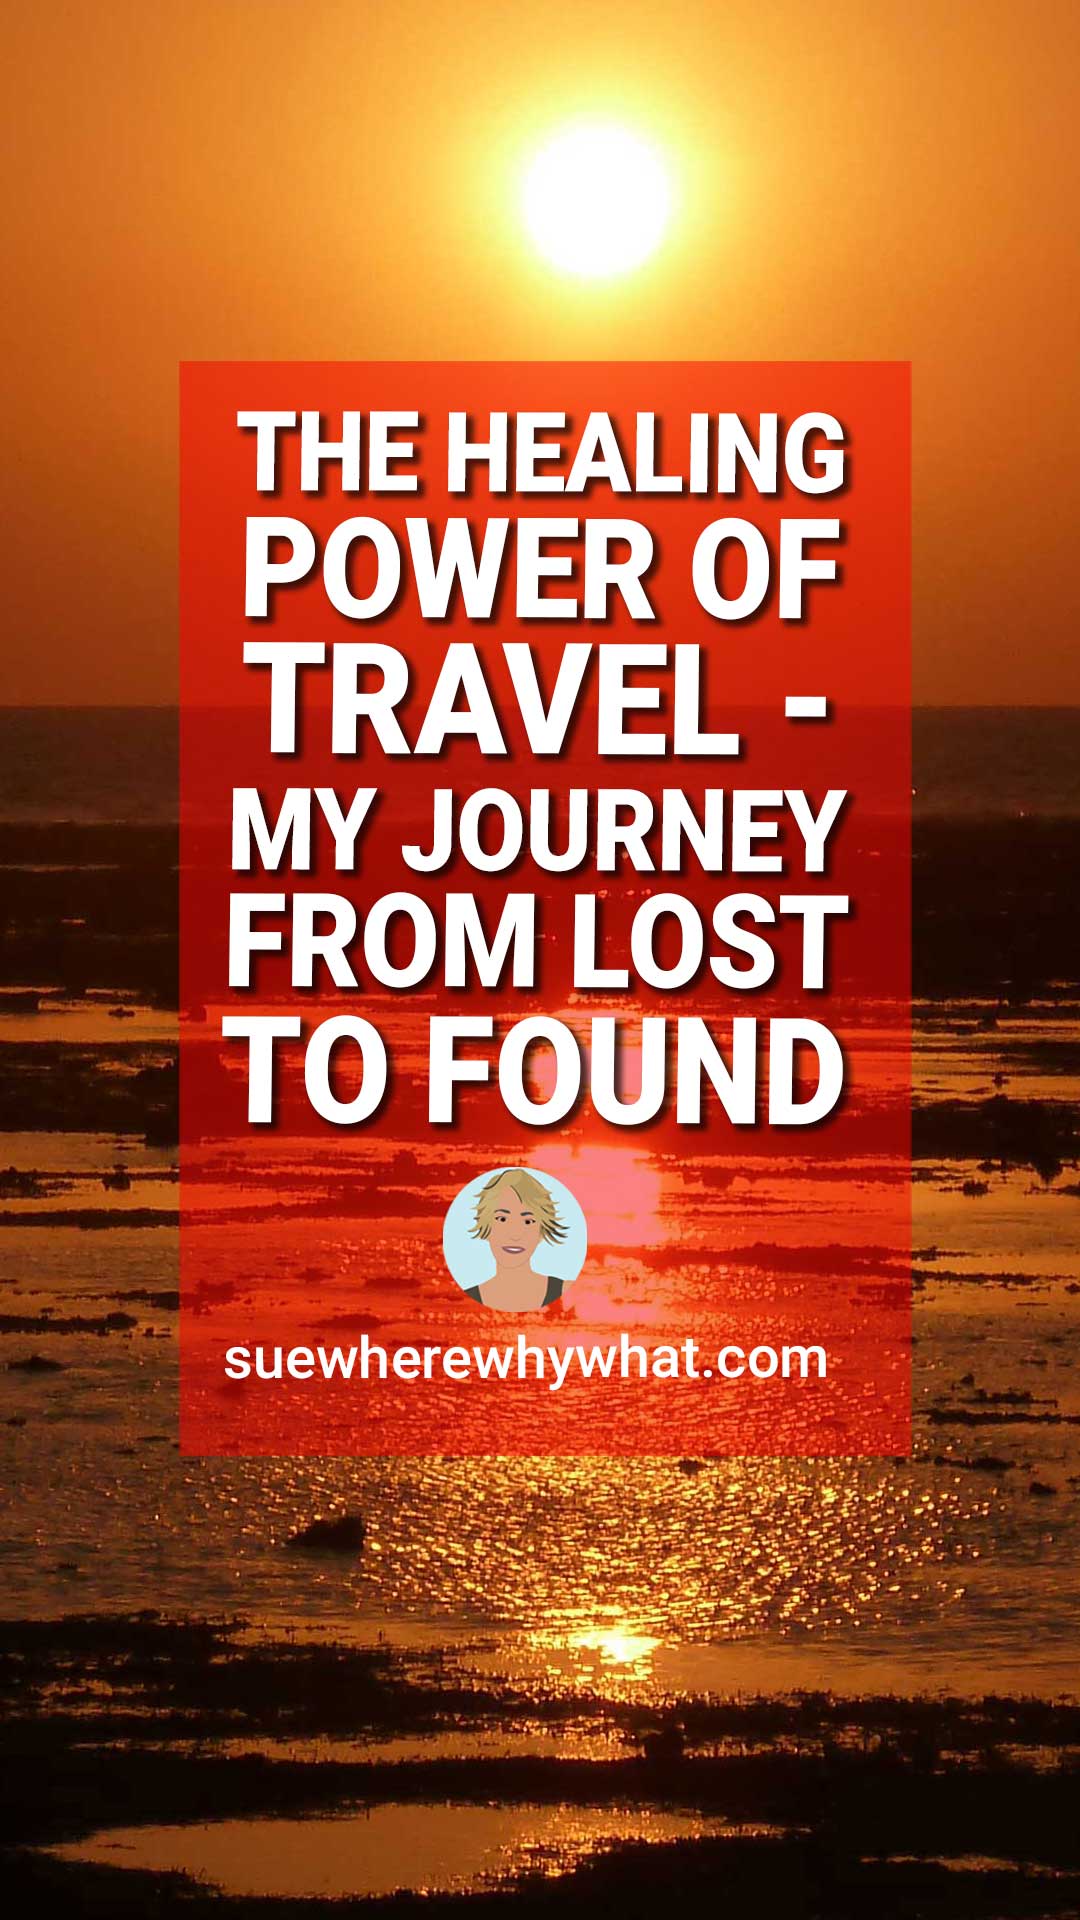 Travel Self-Discovery – My Journey from Lost to Found